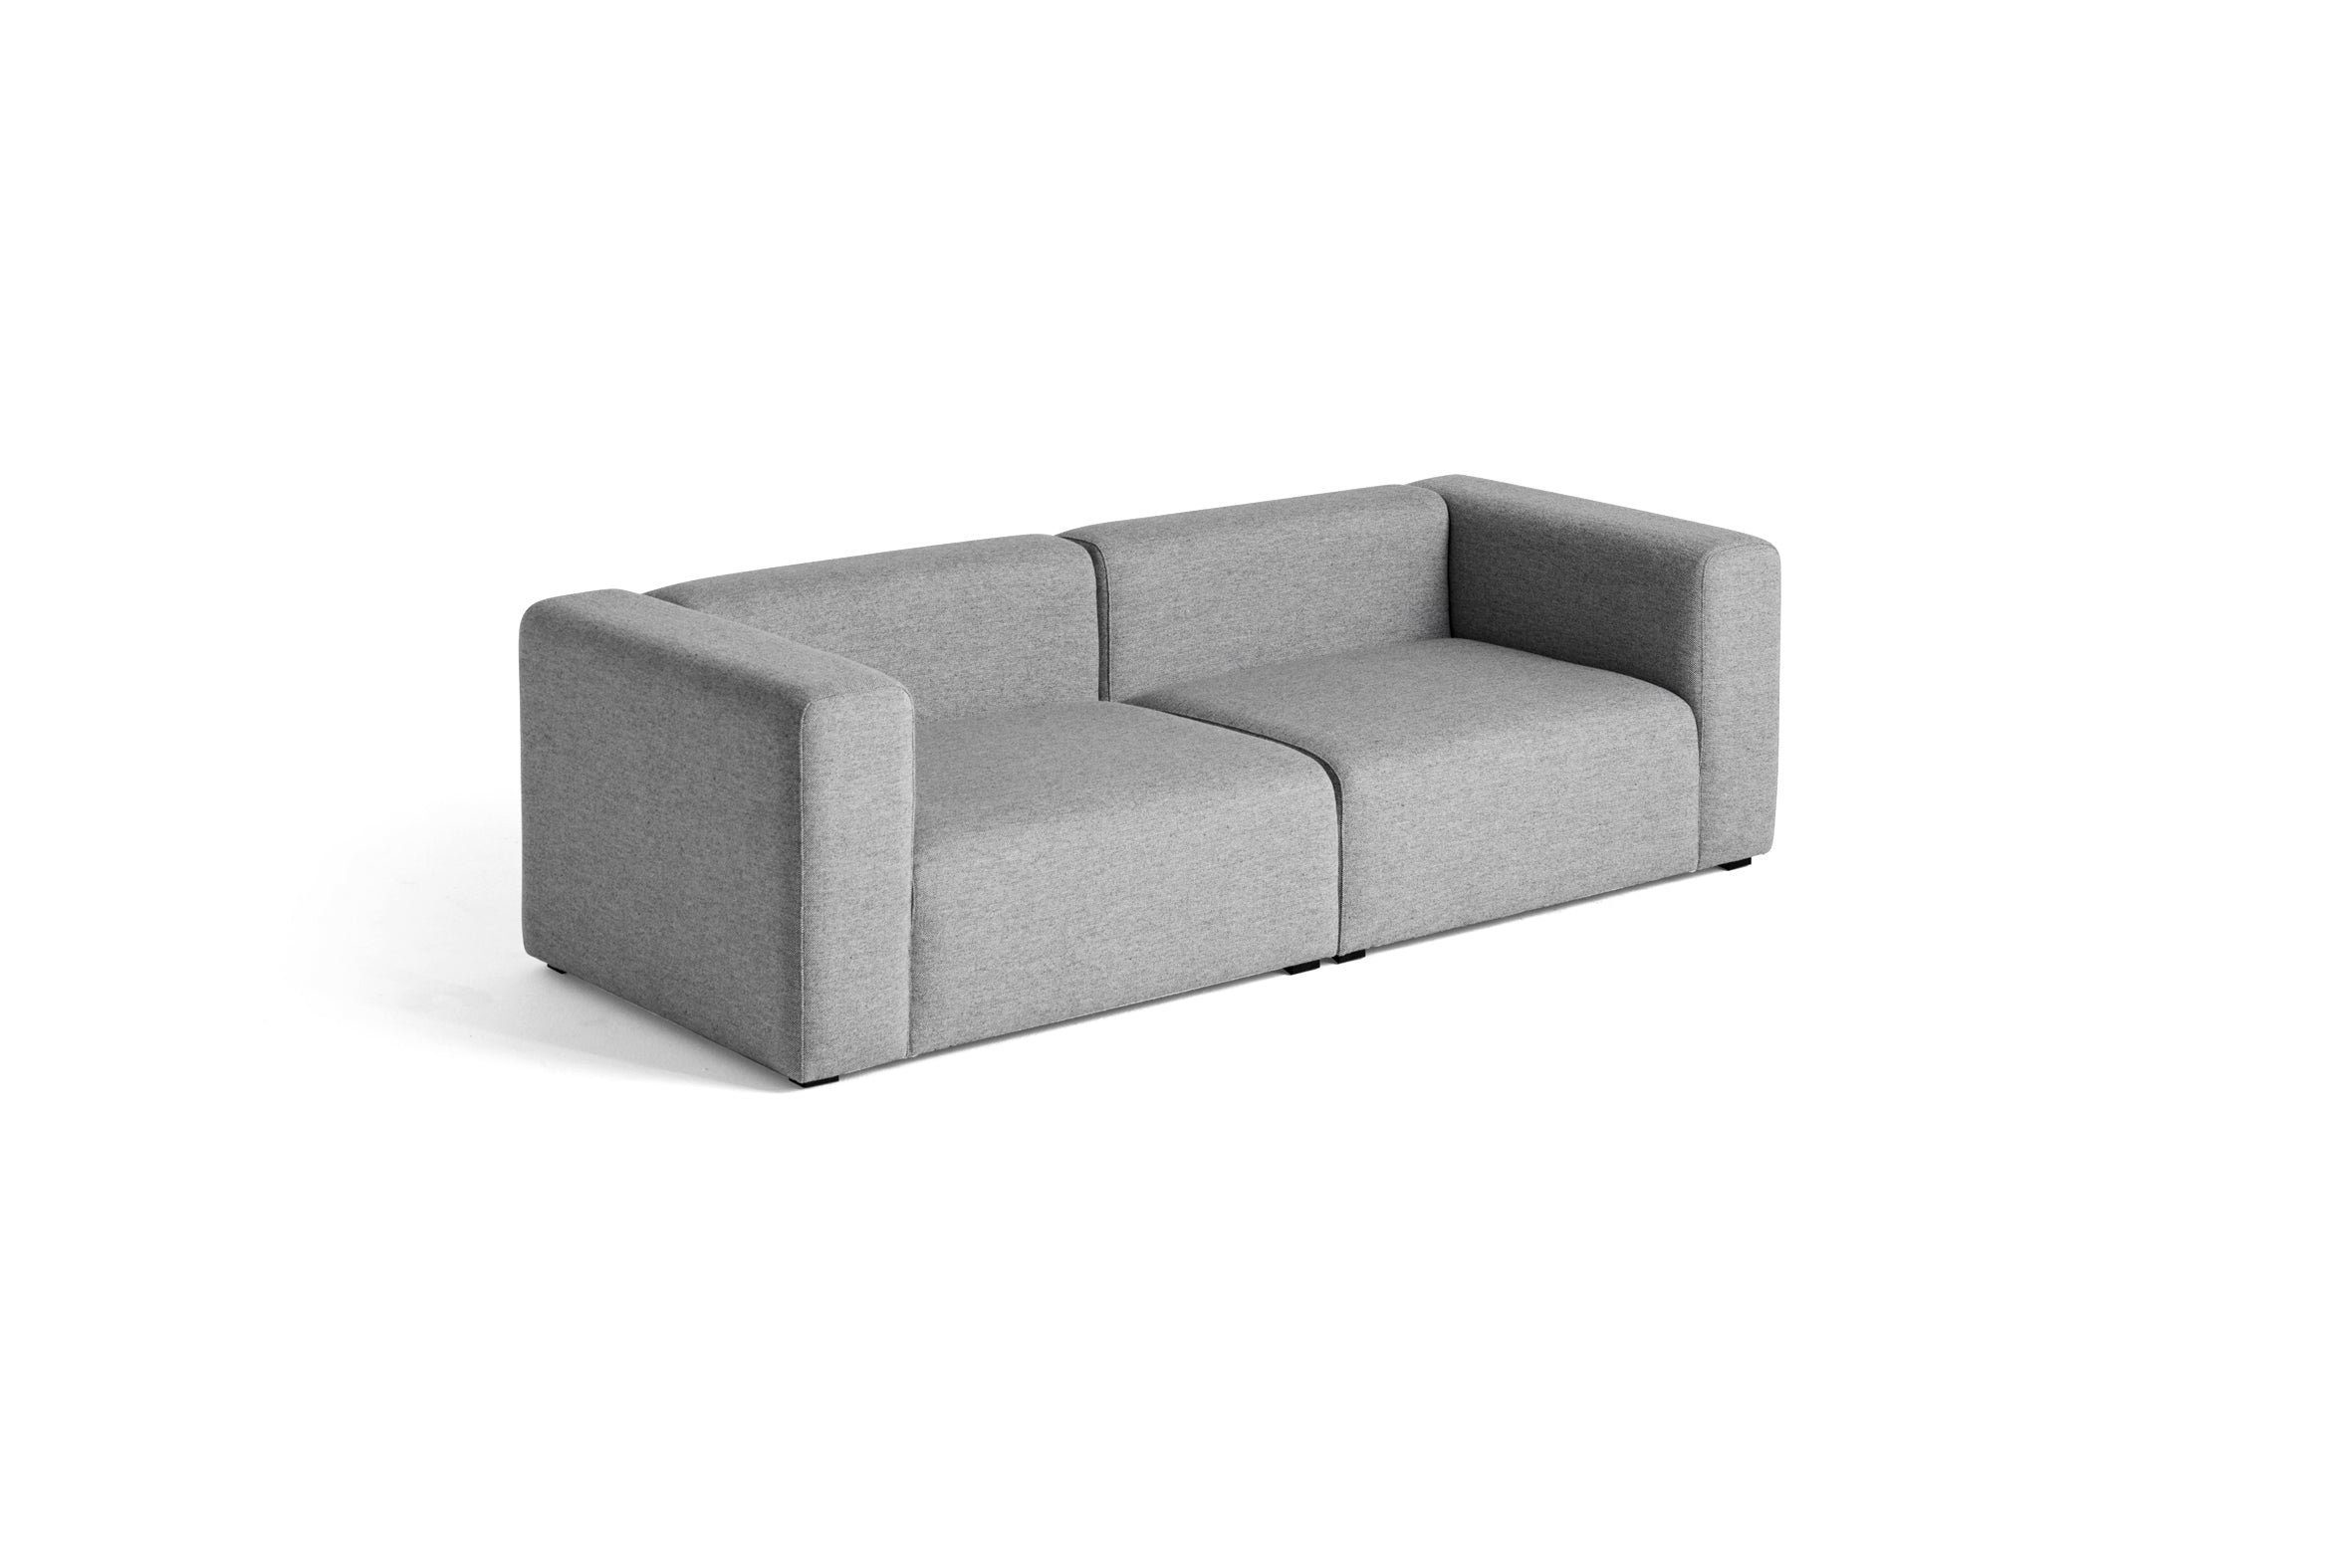 HAY Mags Sofa 2.5 Seater - Combination 1